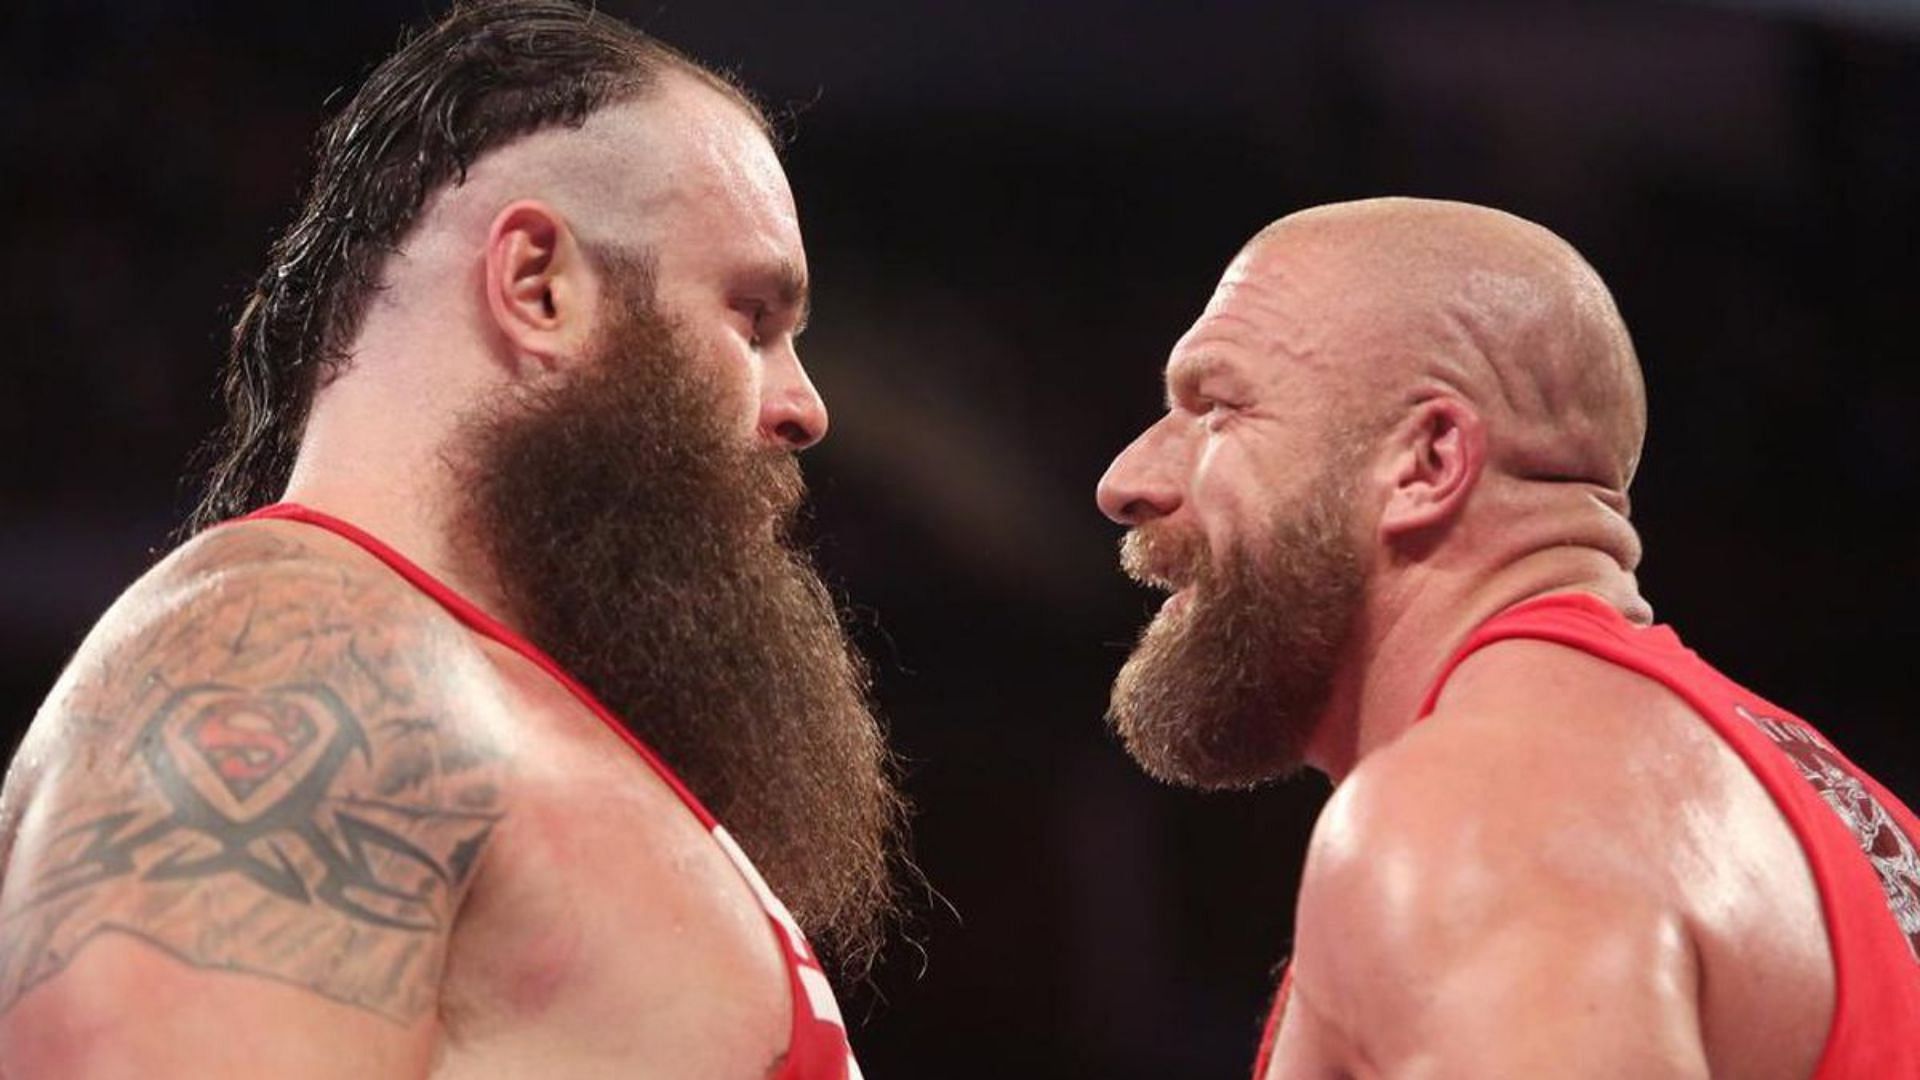 Braun Strowman and Triple H have previously shared screen in WWE